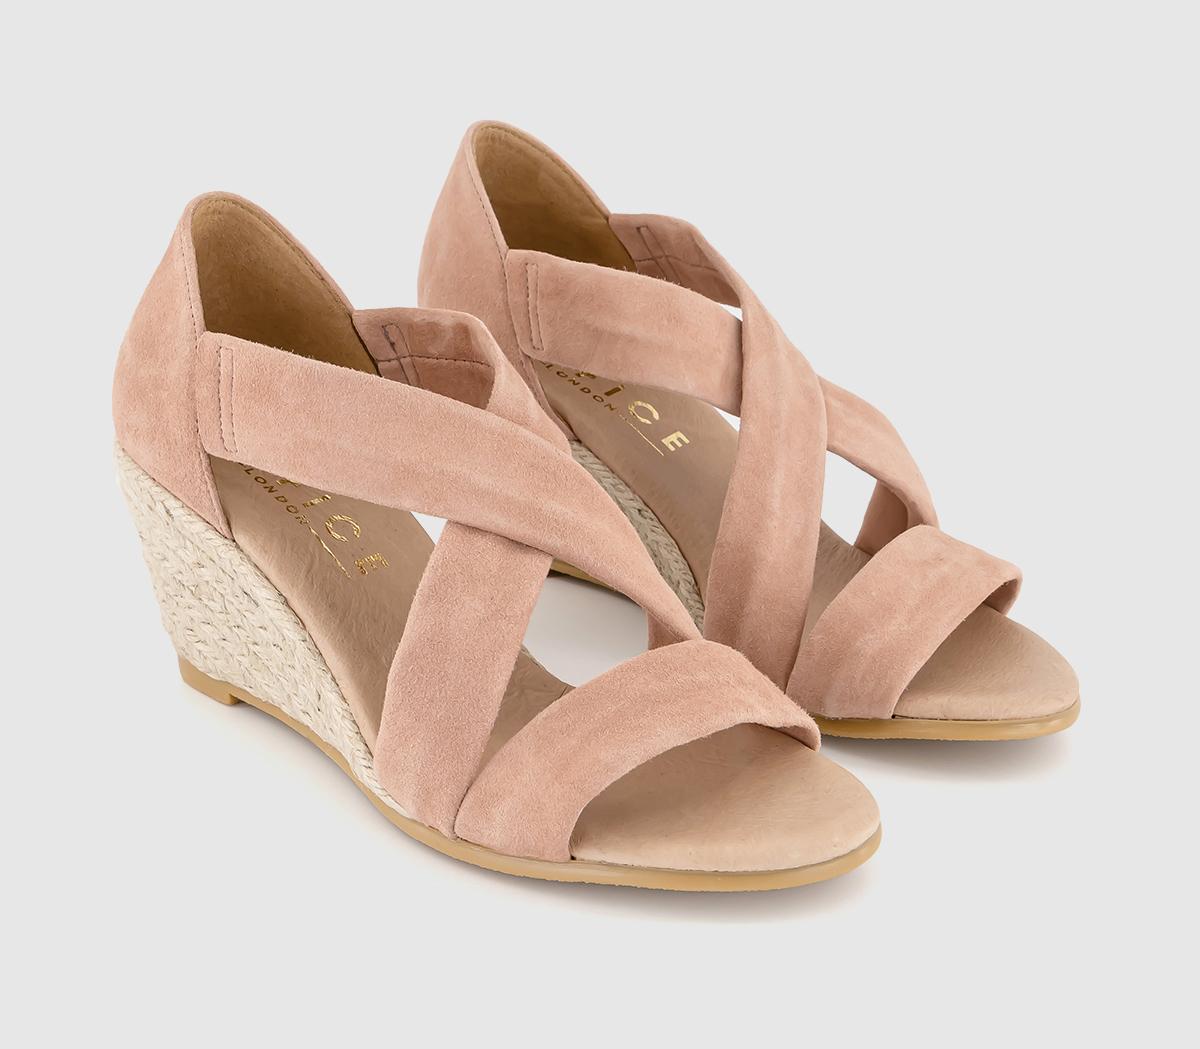 OFFICE Womens Women’s Pink Suede Nude Maiden Cross Strap Wedge Sandals, Size: 5